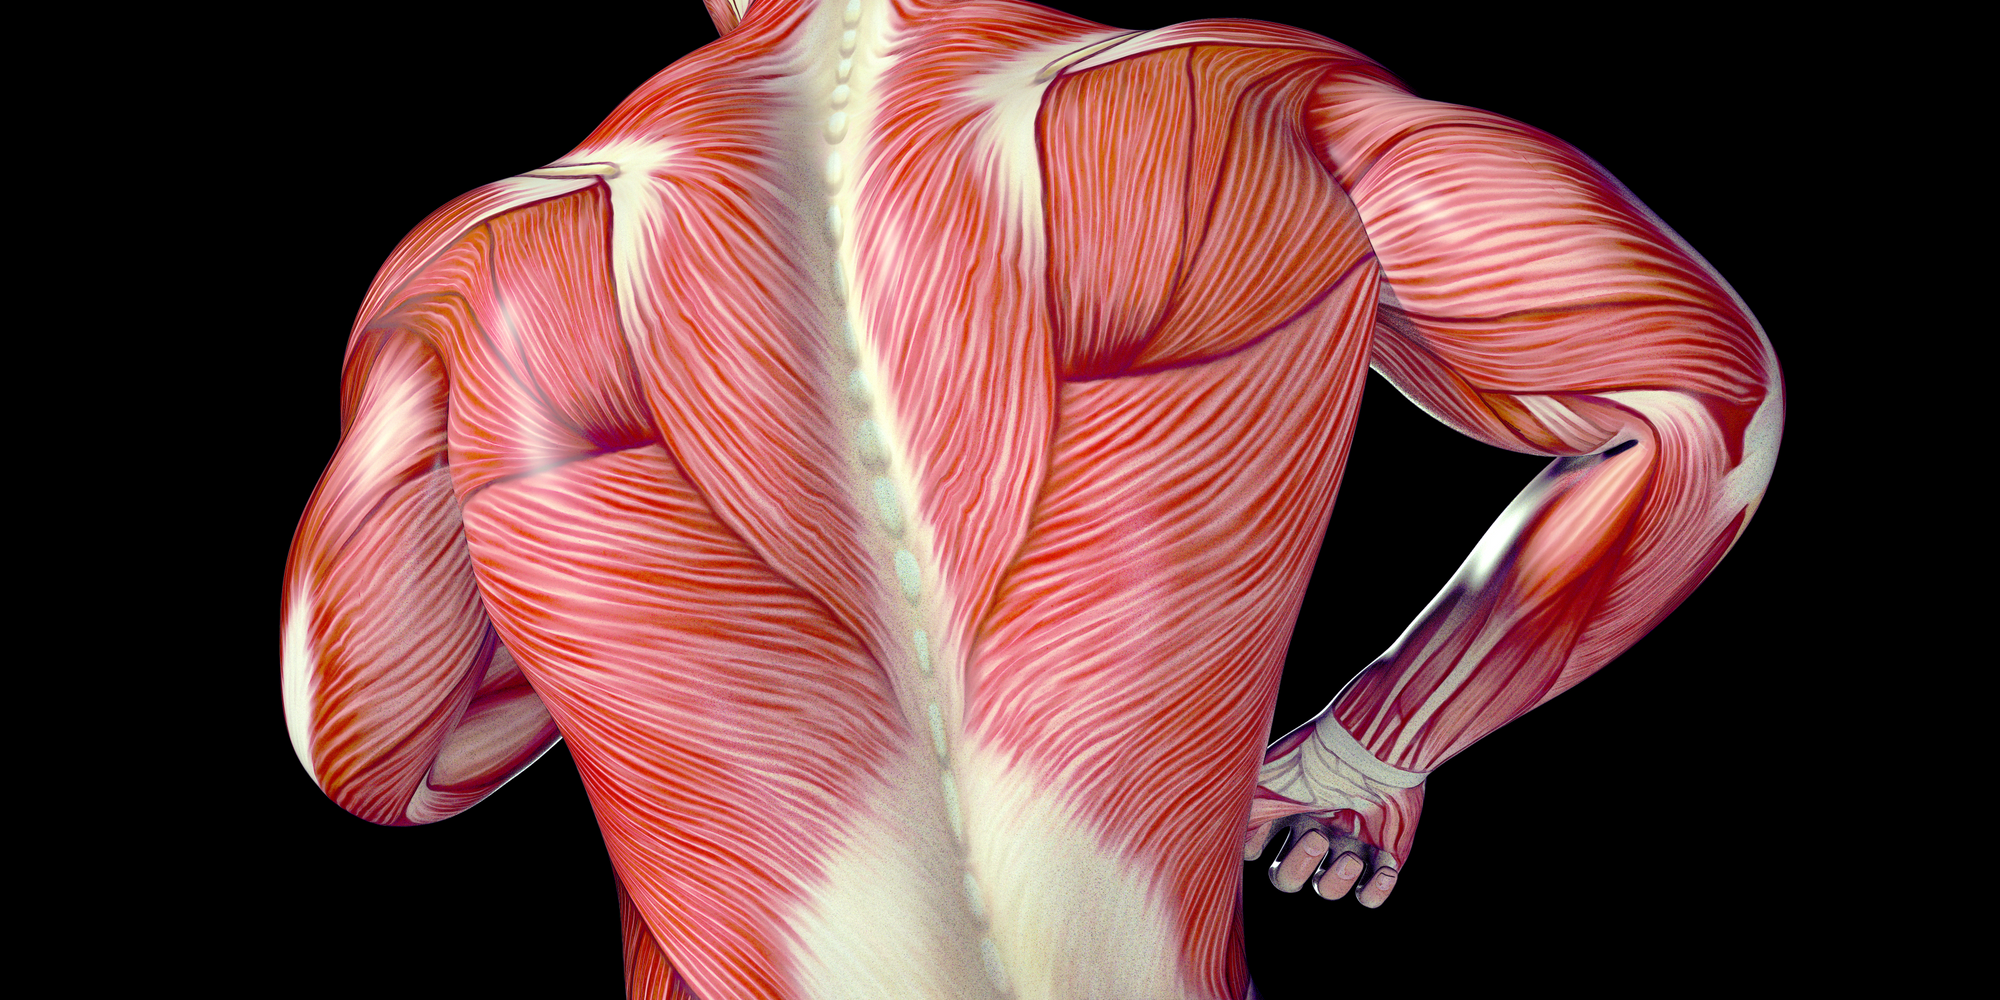 image showing man's back muscles and fascia